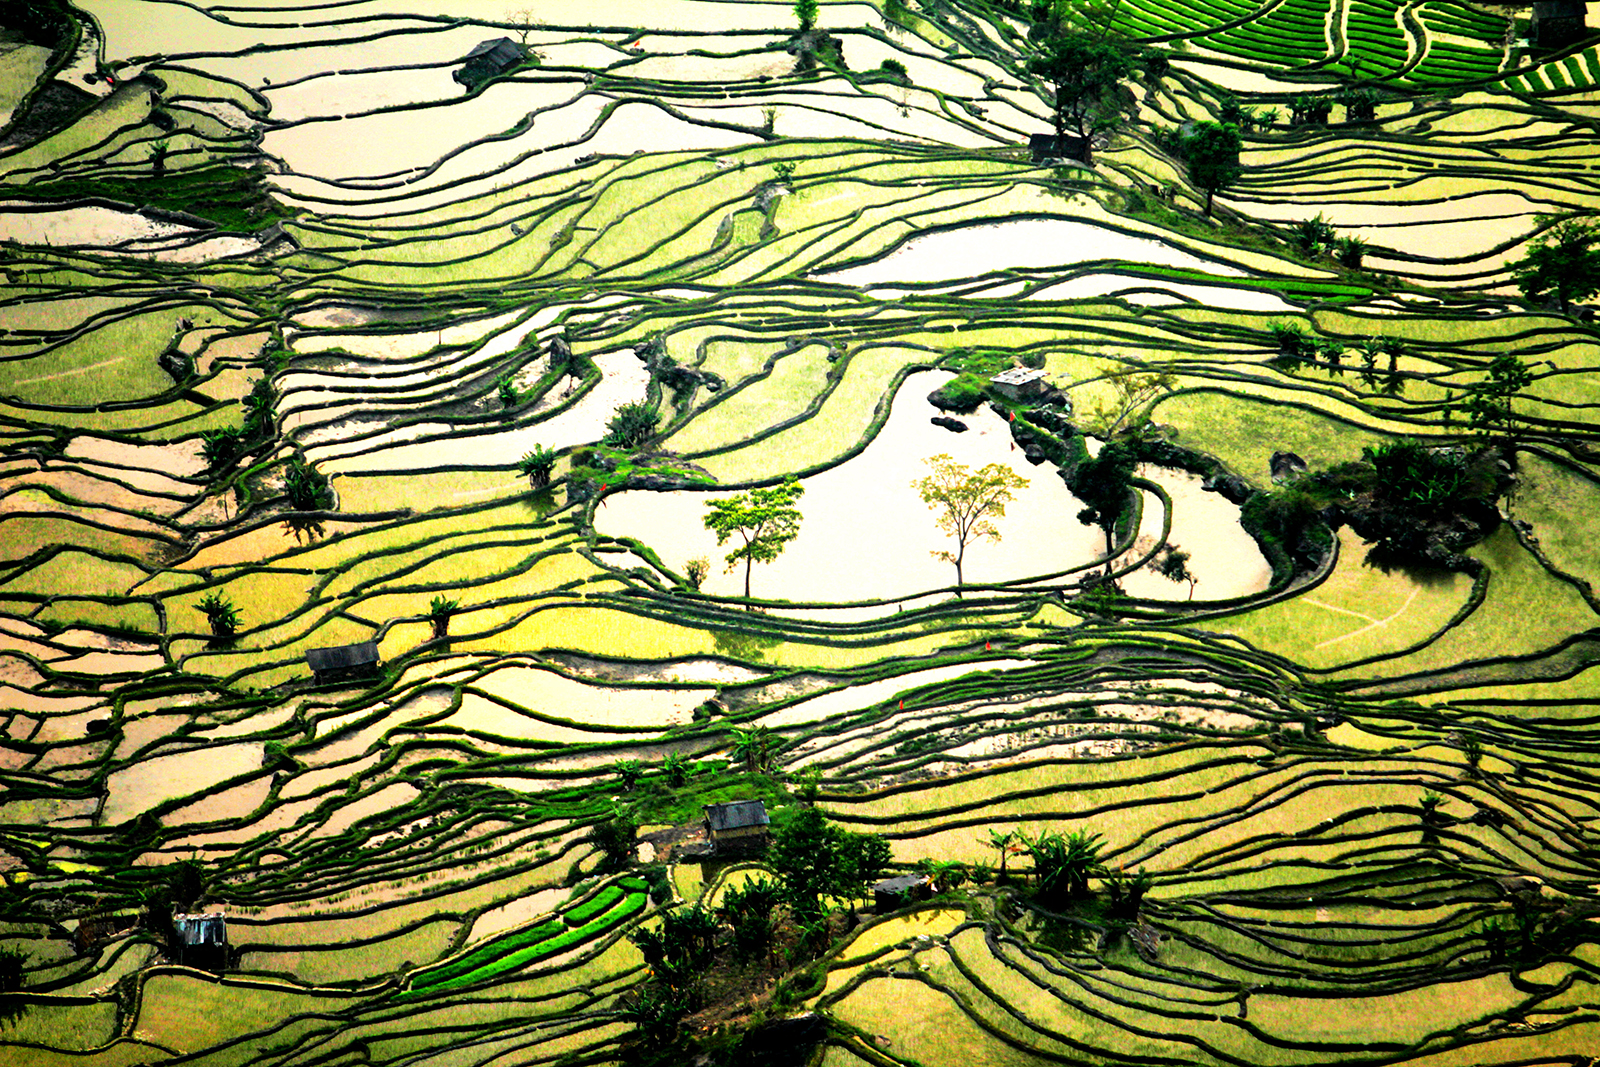 A file photo shows a view of the Honghe Hani Rice Terraces in Yuanyang County, Yunnan Province. /IC